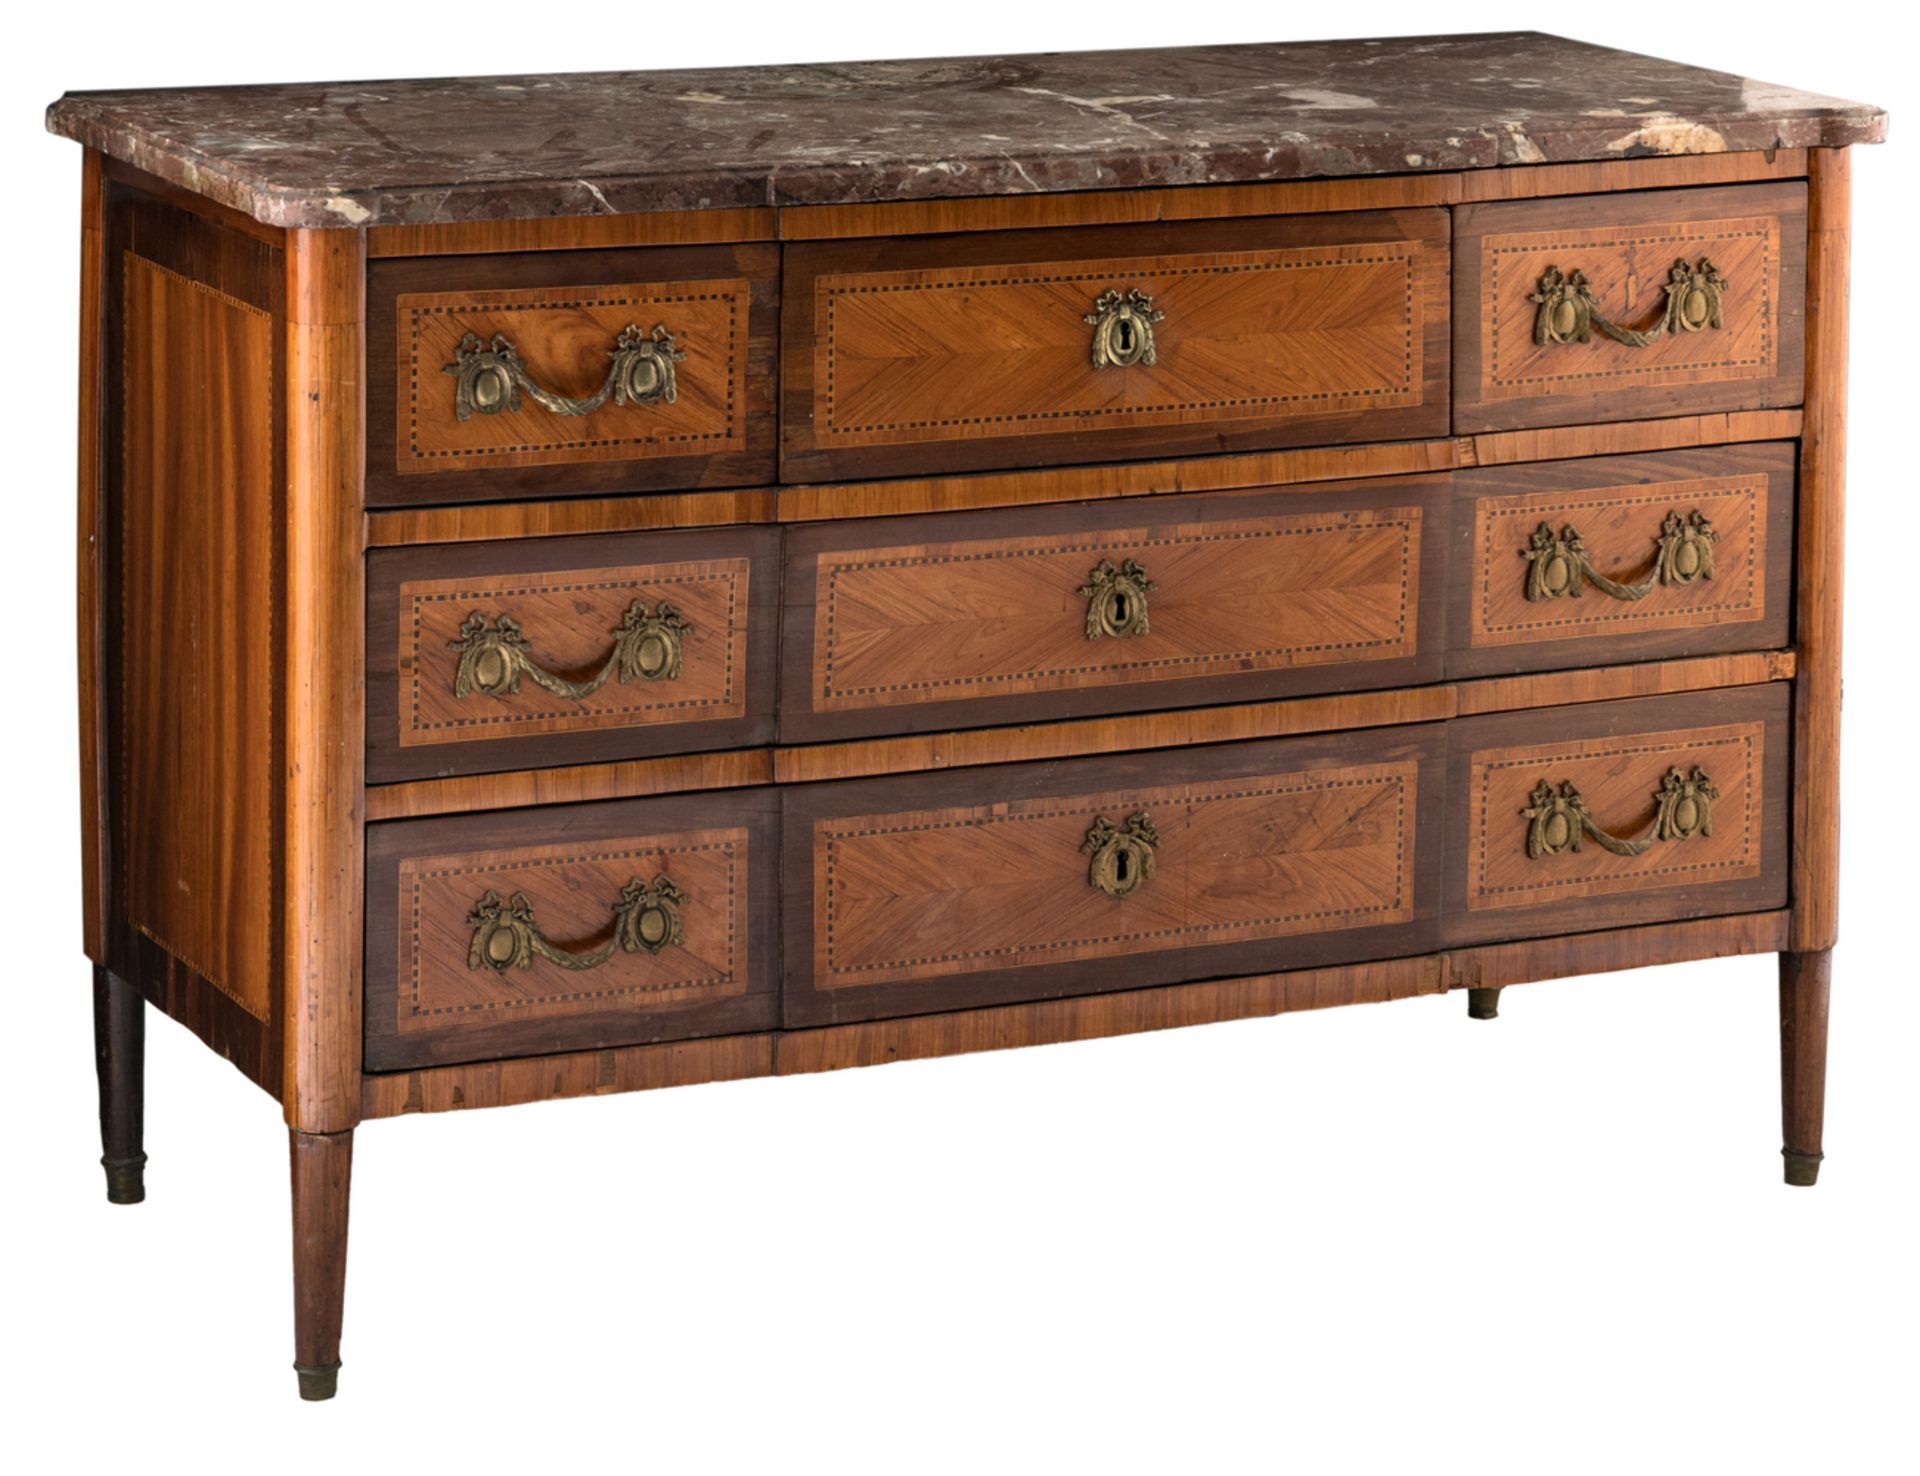 A second half of the 18thC French Neoclassical commode, with walnut marquetry inlay and marble